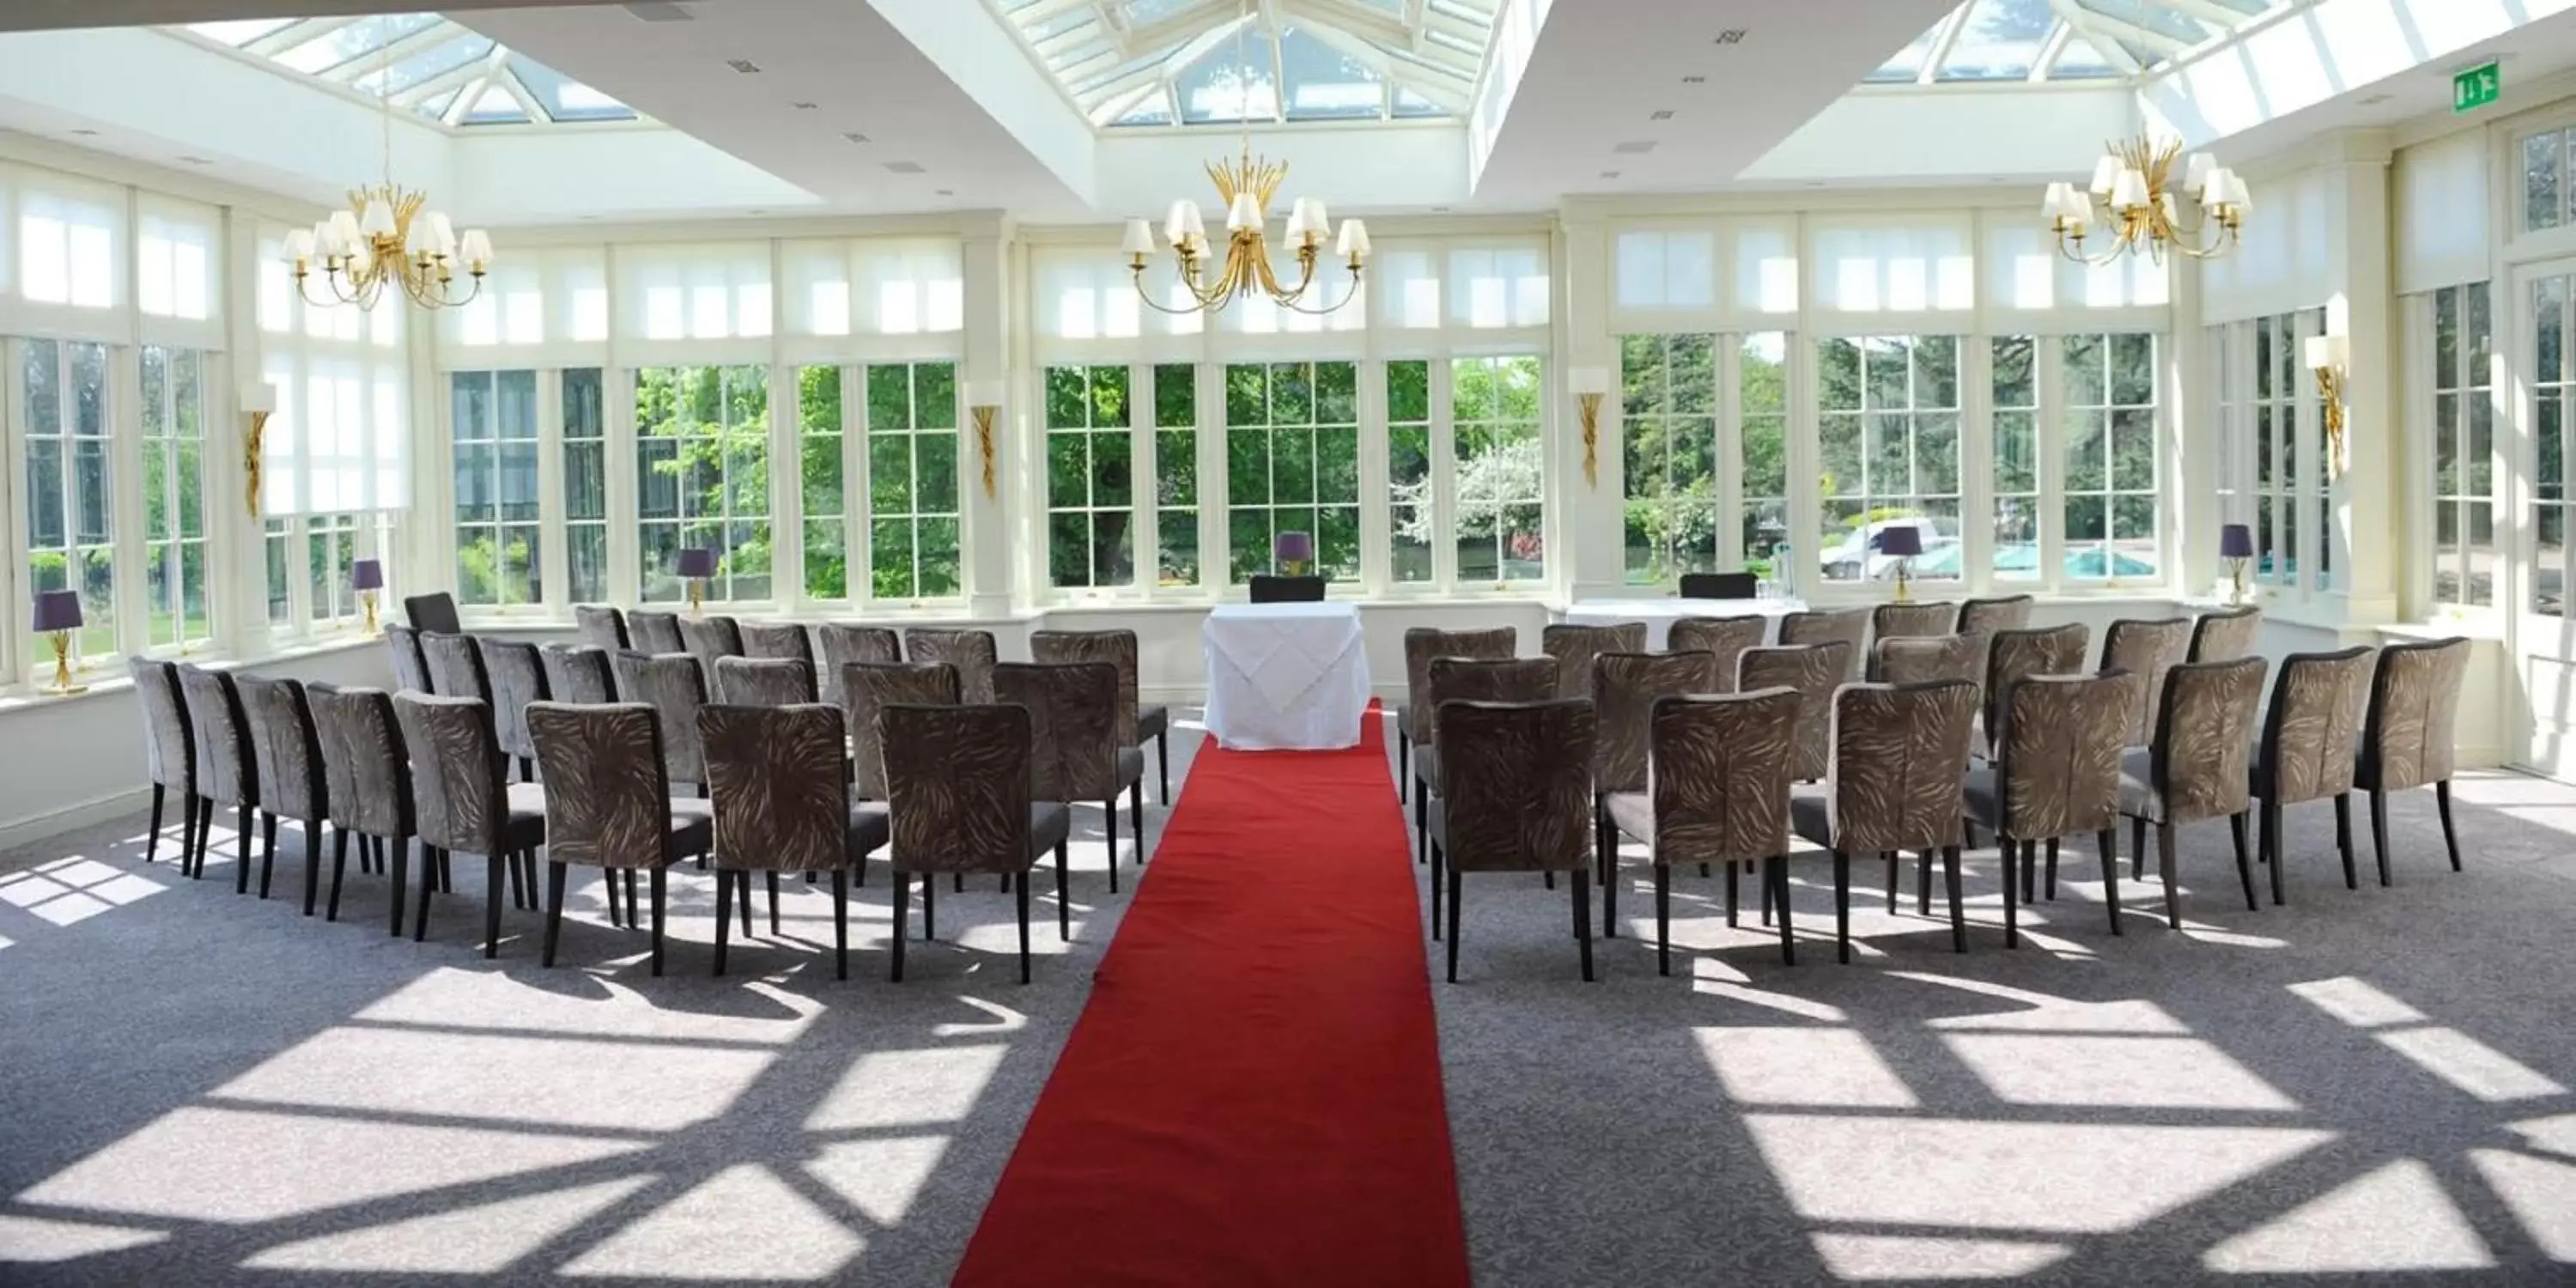 Banquet/Function facilities, Banquet Facilities in St Michael's Manor Hotel - St Albans